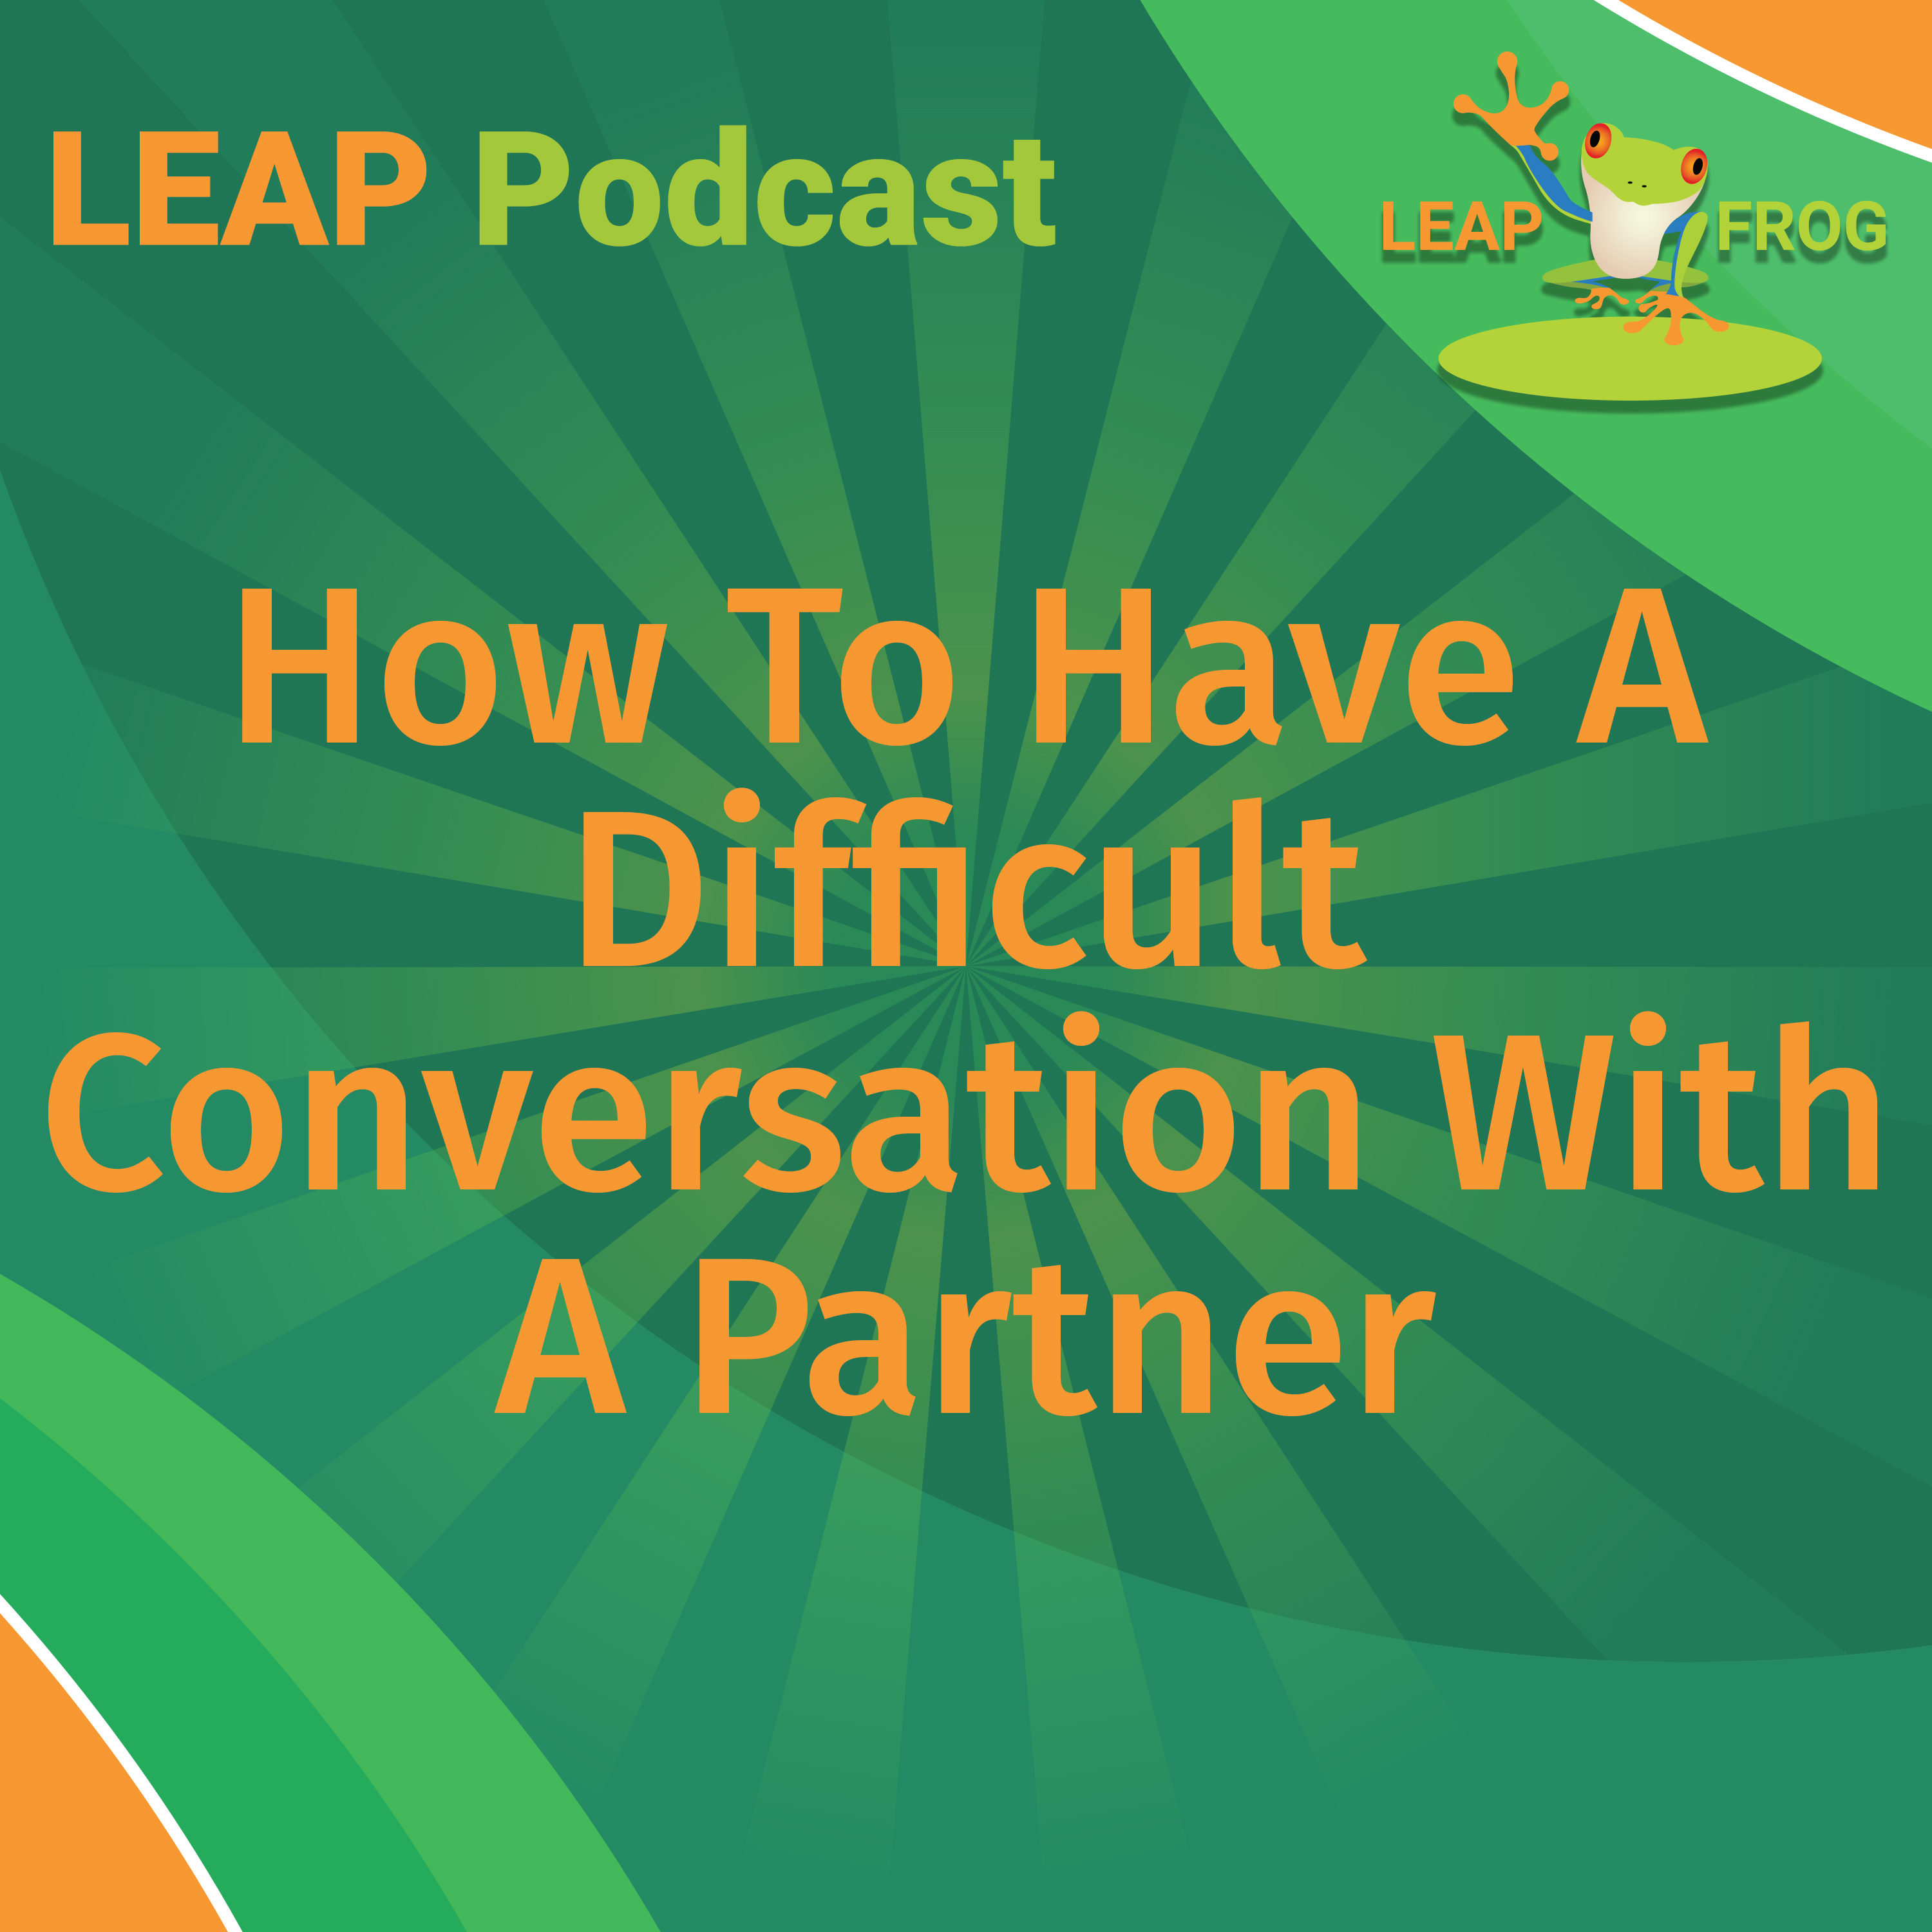 How To Have A Difficult Conversation With A Partner LEAP Podcast episode cover art